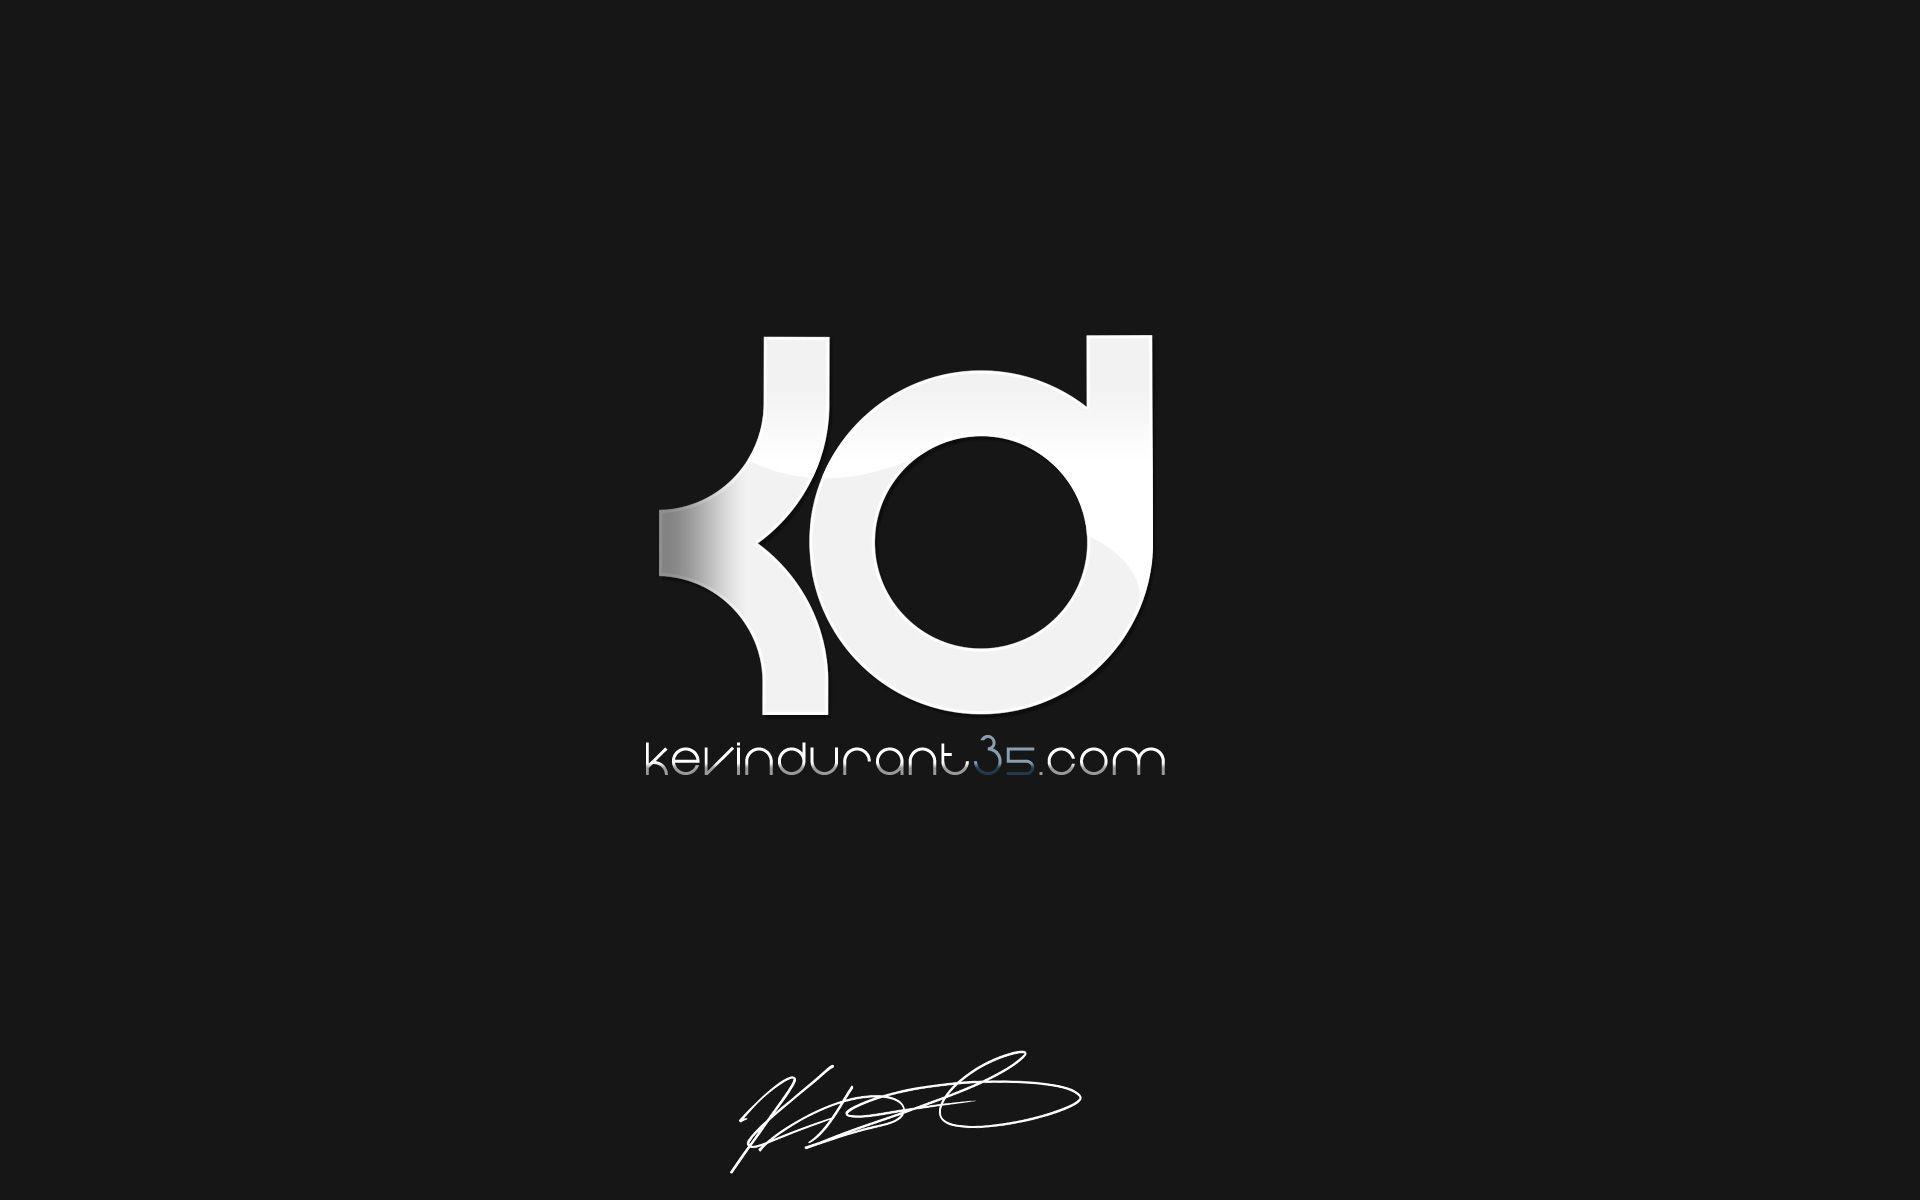 Kevin Durant Kd Logo Wallpapers Wallpaper Cave